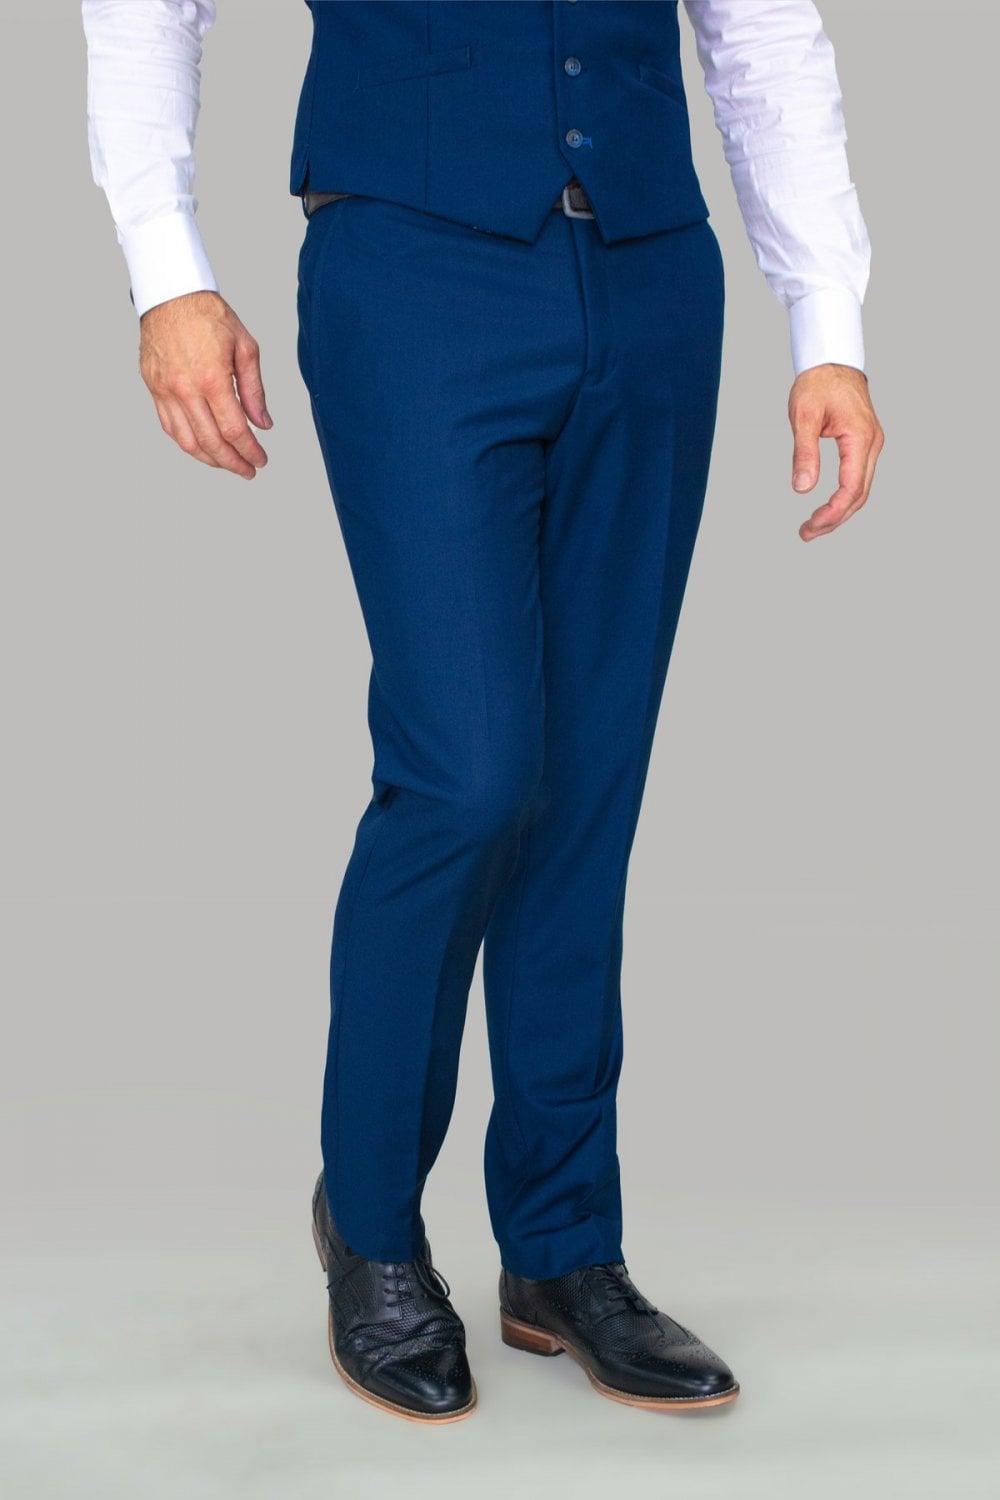 Jefferson Navy Trousers - Trousers - 28R - THREADPEPPER